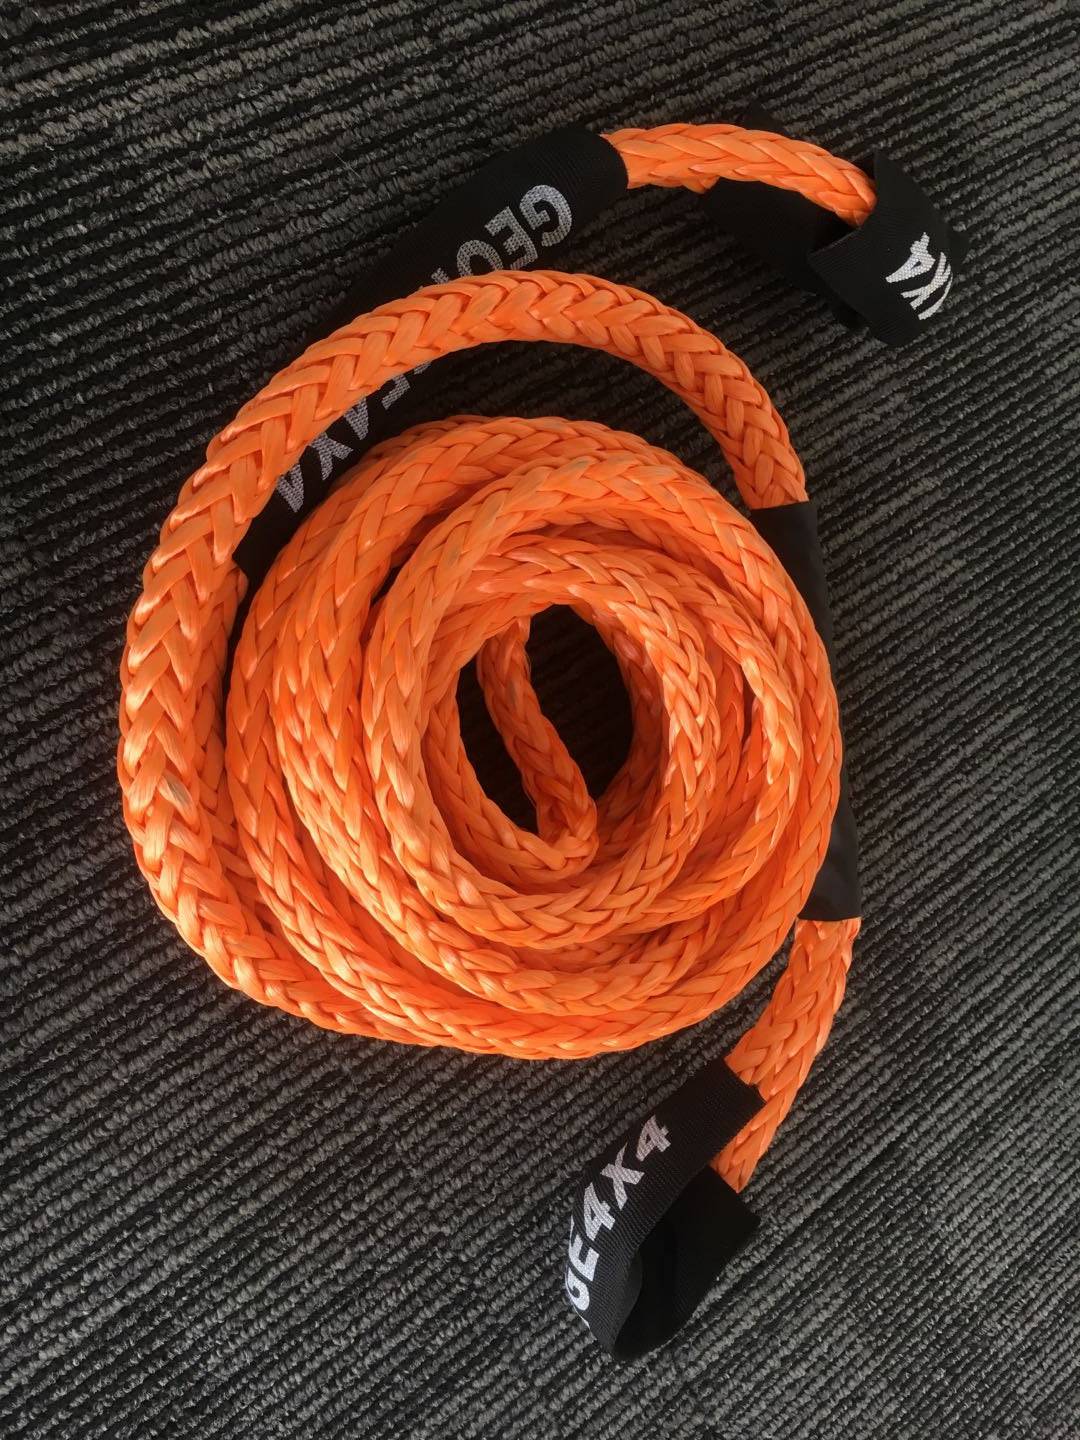 Towing Rope 11mm*11000kg, Winch Extension, 4WD Recovery gear 4x4 offroad